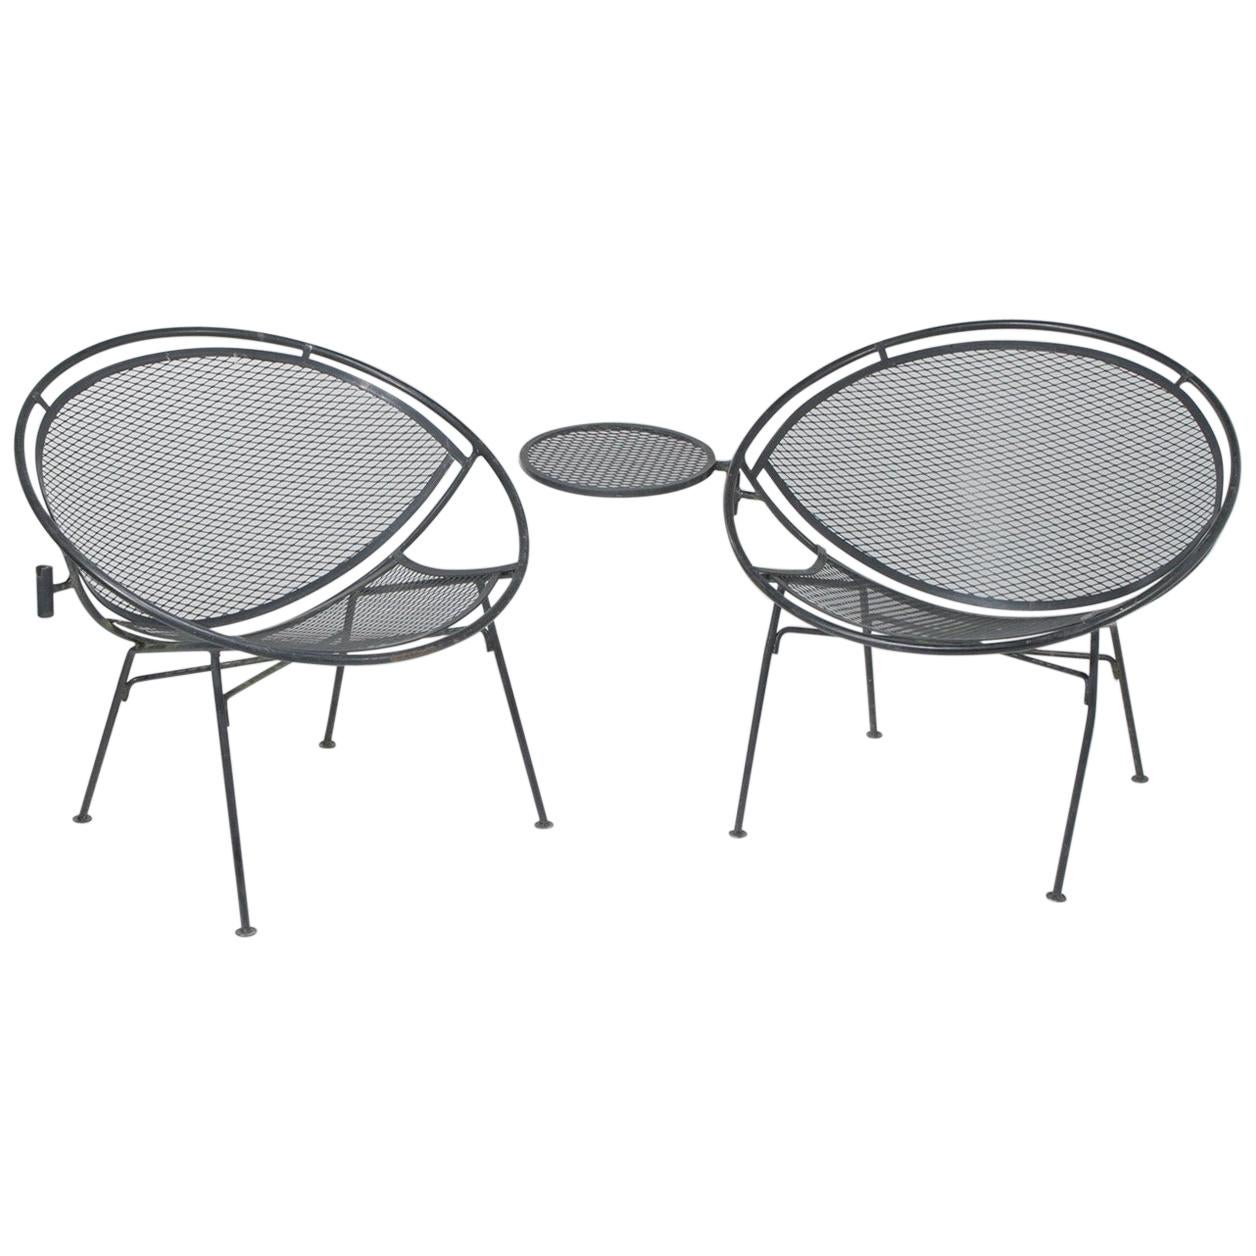 Iconic Salterini Mid-Century Modern Patio Chairs with Attached Side Table, Pair